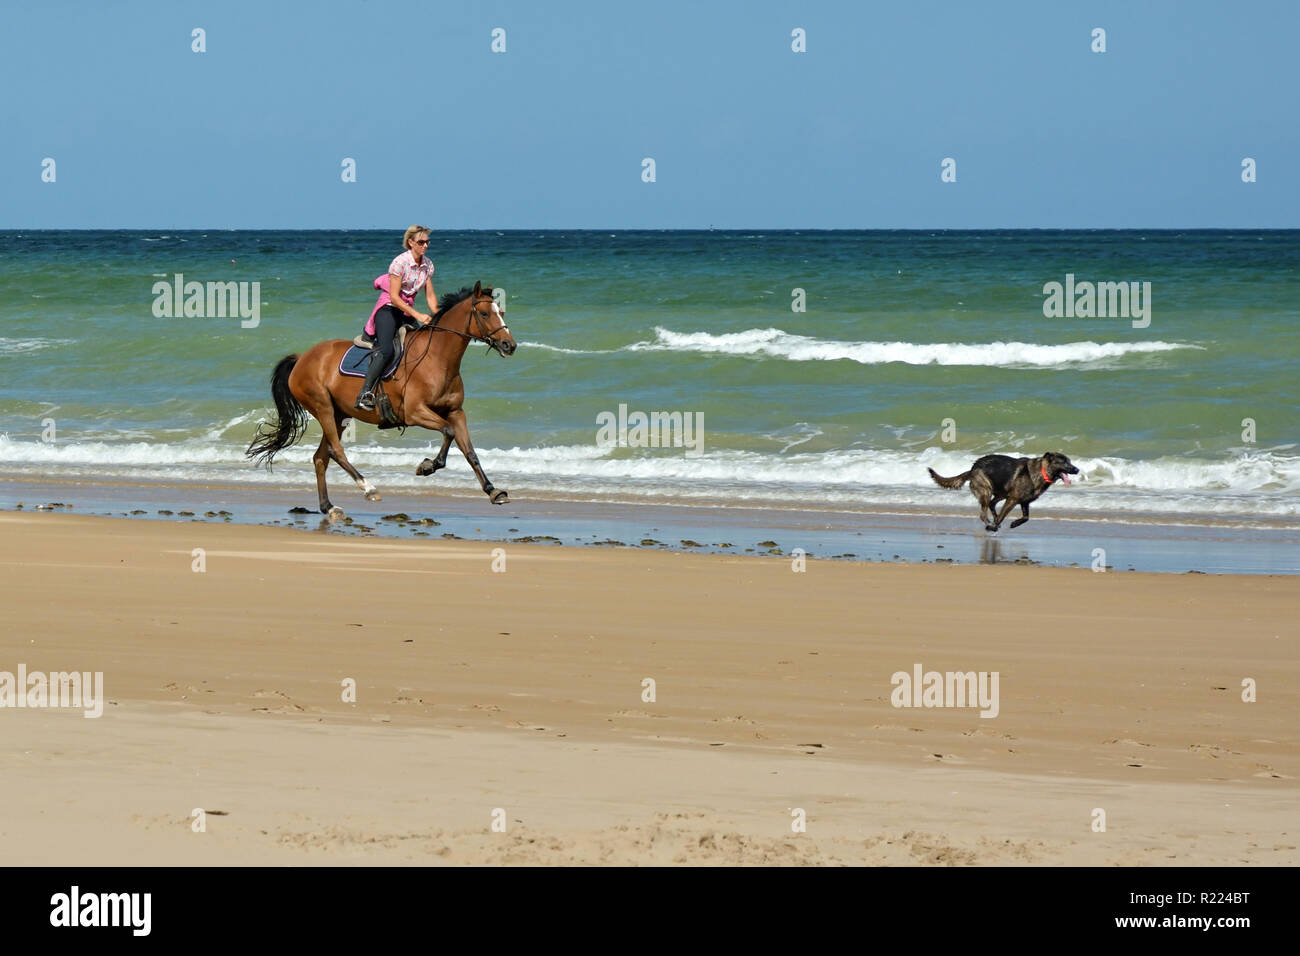 NORMANDY, FRANCE - SEPTEMBER 2016 - young woman chasing her dog on horse on beach in Normandy, France Stock Photo